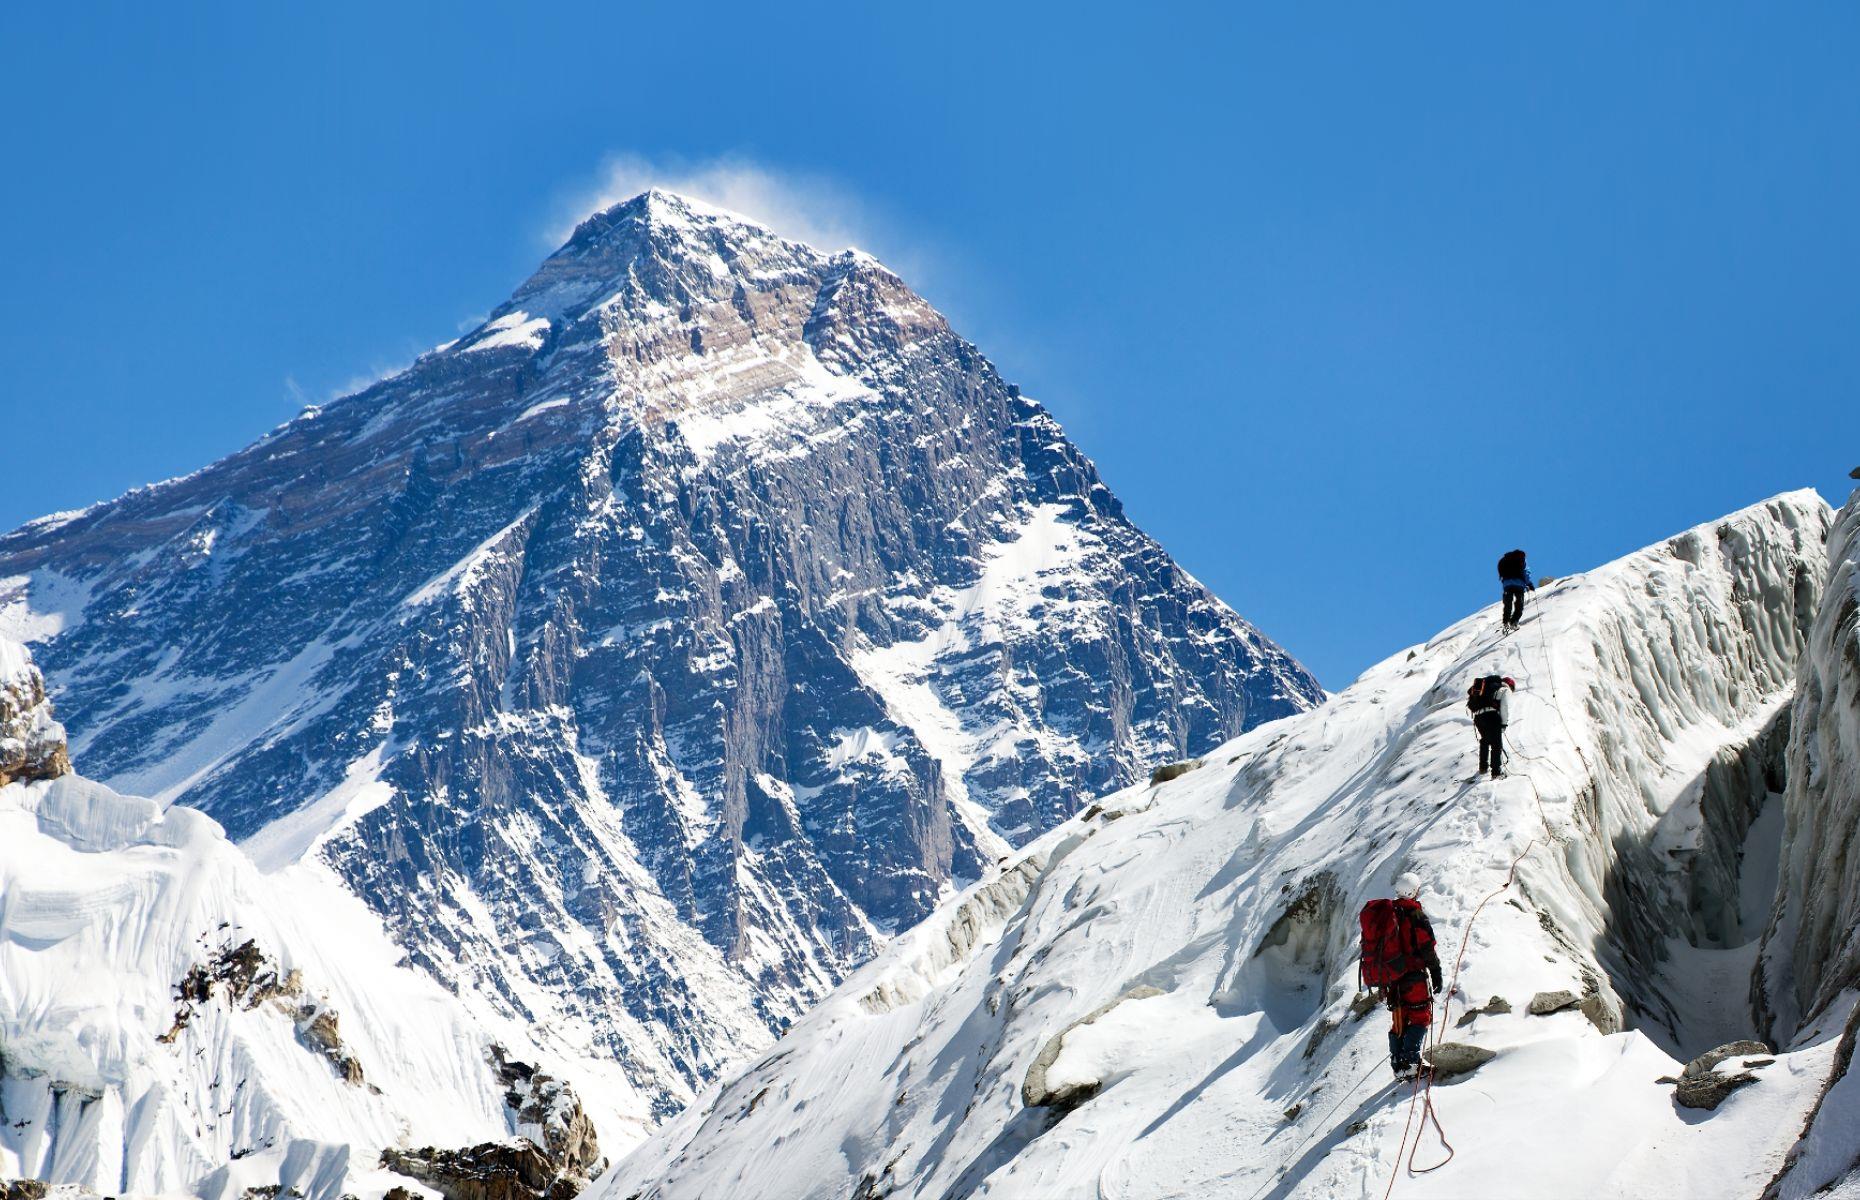 <p>At a dizzying <a href="https://www.britannica.com/place/Himalayas">29,032 feet (8,849m) above sea level</a>, Mount Everest is the highest mountain on Earth. But Everest is not its only name. Straddling the border between Nepal and Tibet, the mountain is known as Sagarmatha in Sanskrit, meaning “peak of heaven”, and Chomolungma in Tibetan, meaning “goddess of the valley”. It gained the name Everest in 1865 after the British surveyor general of India, Sir George Everest.</p>  <p><a href="https://www.facebook.com/loveexploringUK?utm_source=msn&utm_medium=social&utm_campaign=front"><strong>Love this? Follow us on Facebook for more travel inspiration</strong></a></p>